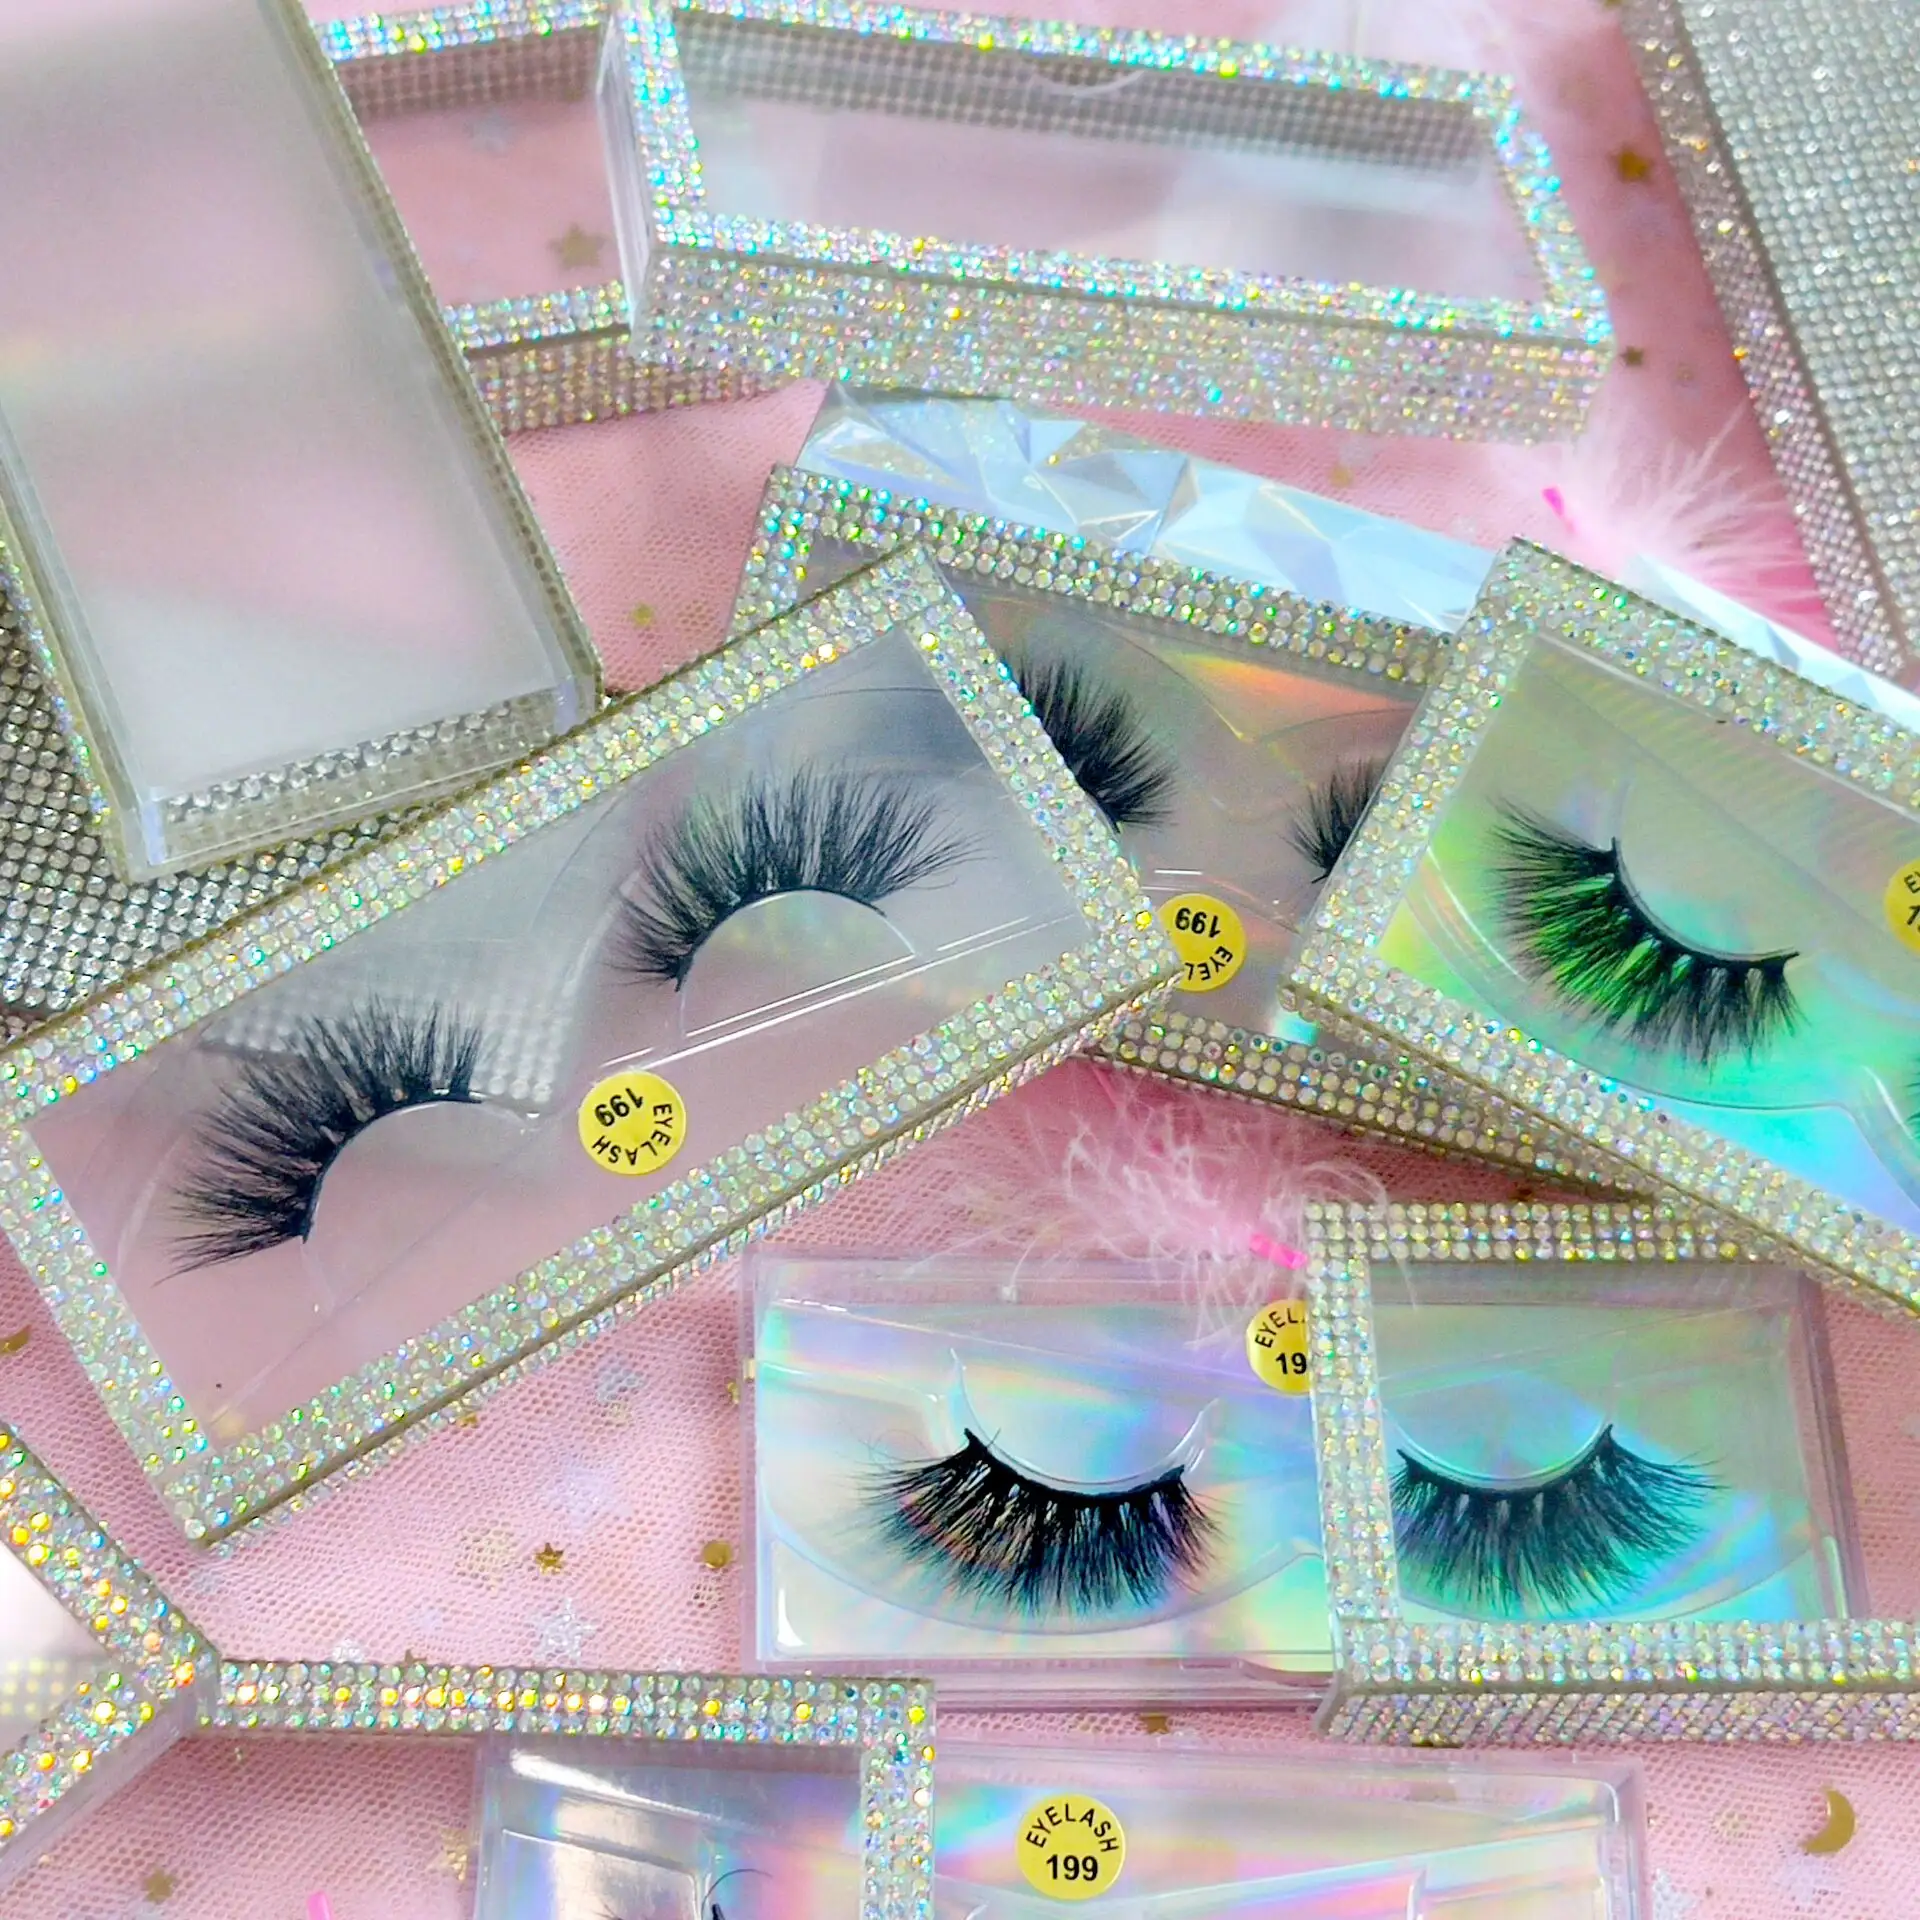 Whole Sale Eyelash Make up strip lashes package box private label new design mink lashes packaging for lashes